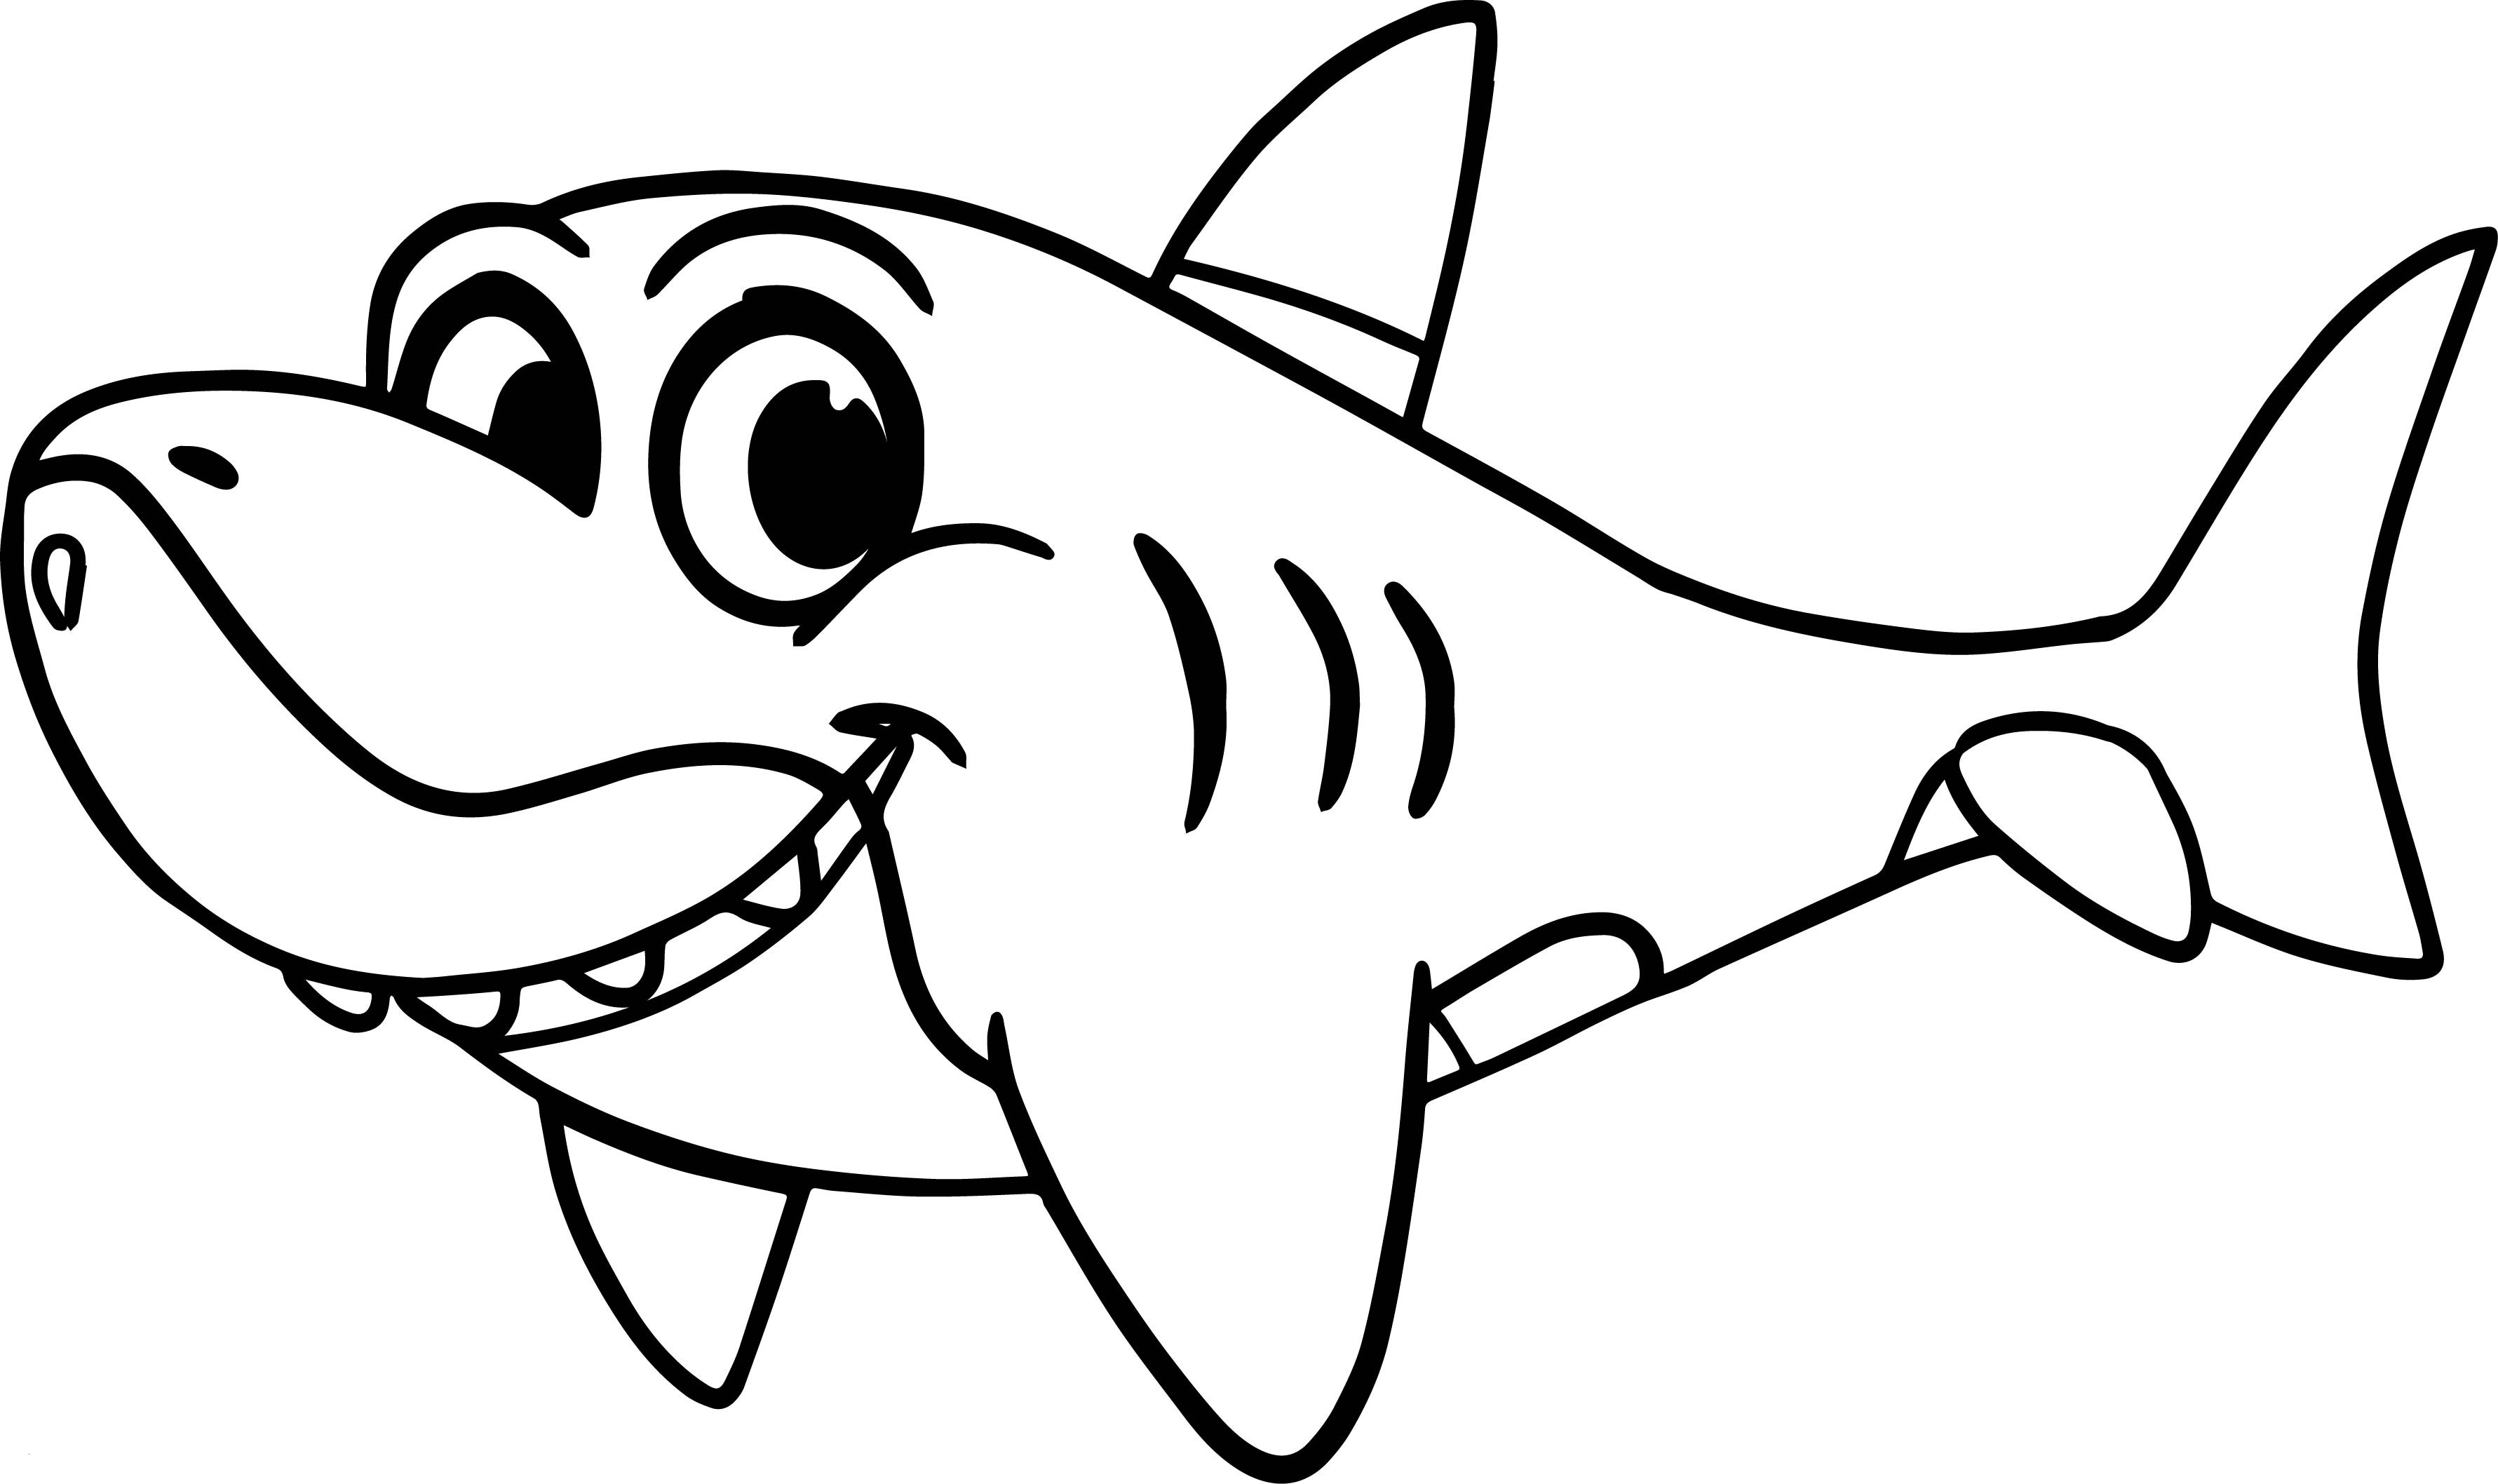 Coloring Pages : Stunning Baby Shark Coloring Pages Image ...